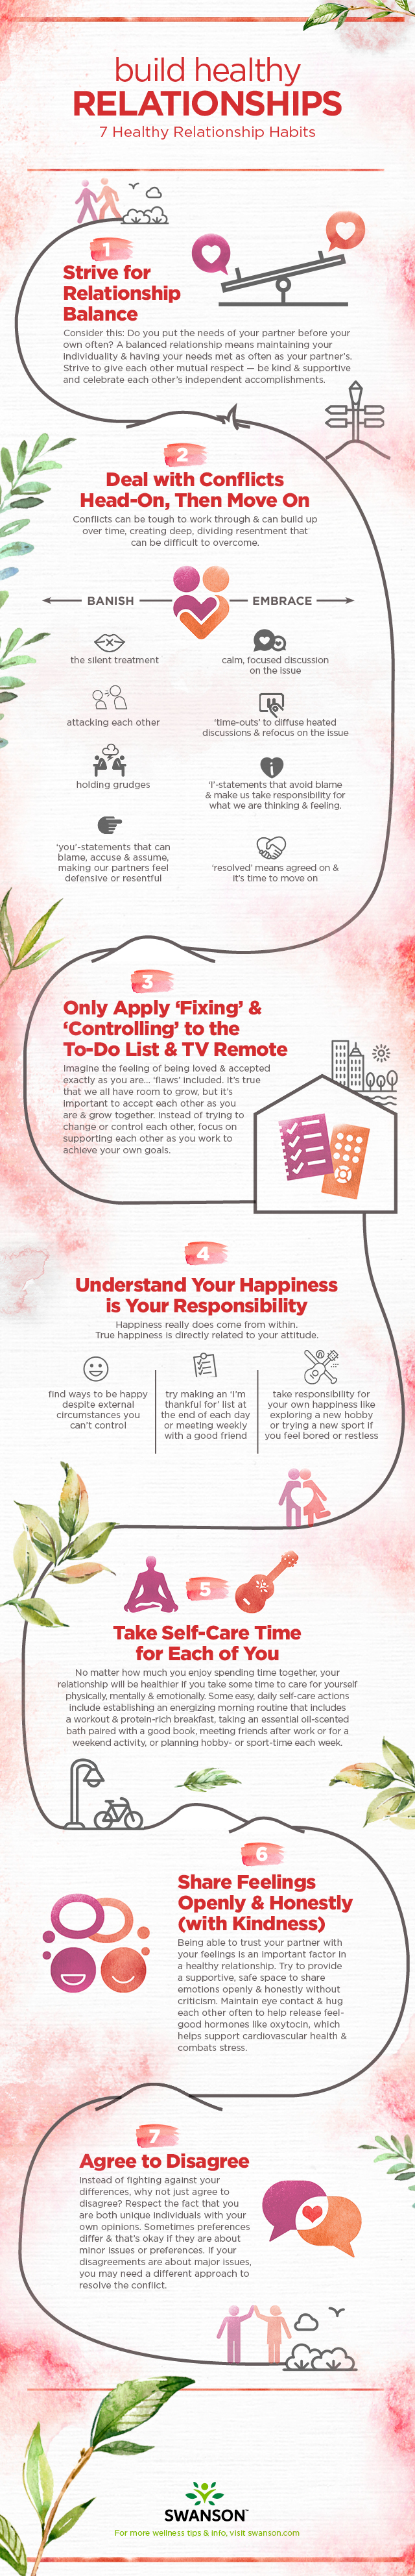 Build Healthy Relationships - infographic with tips on how to have healthy relationships